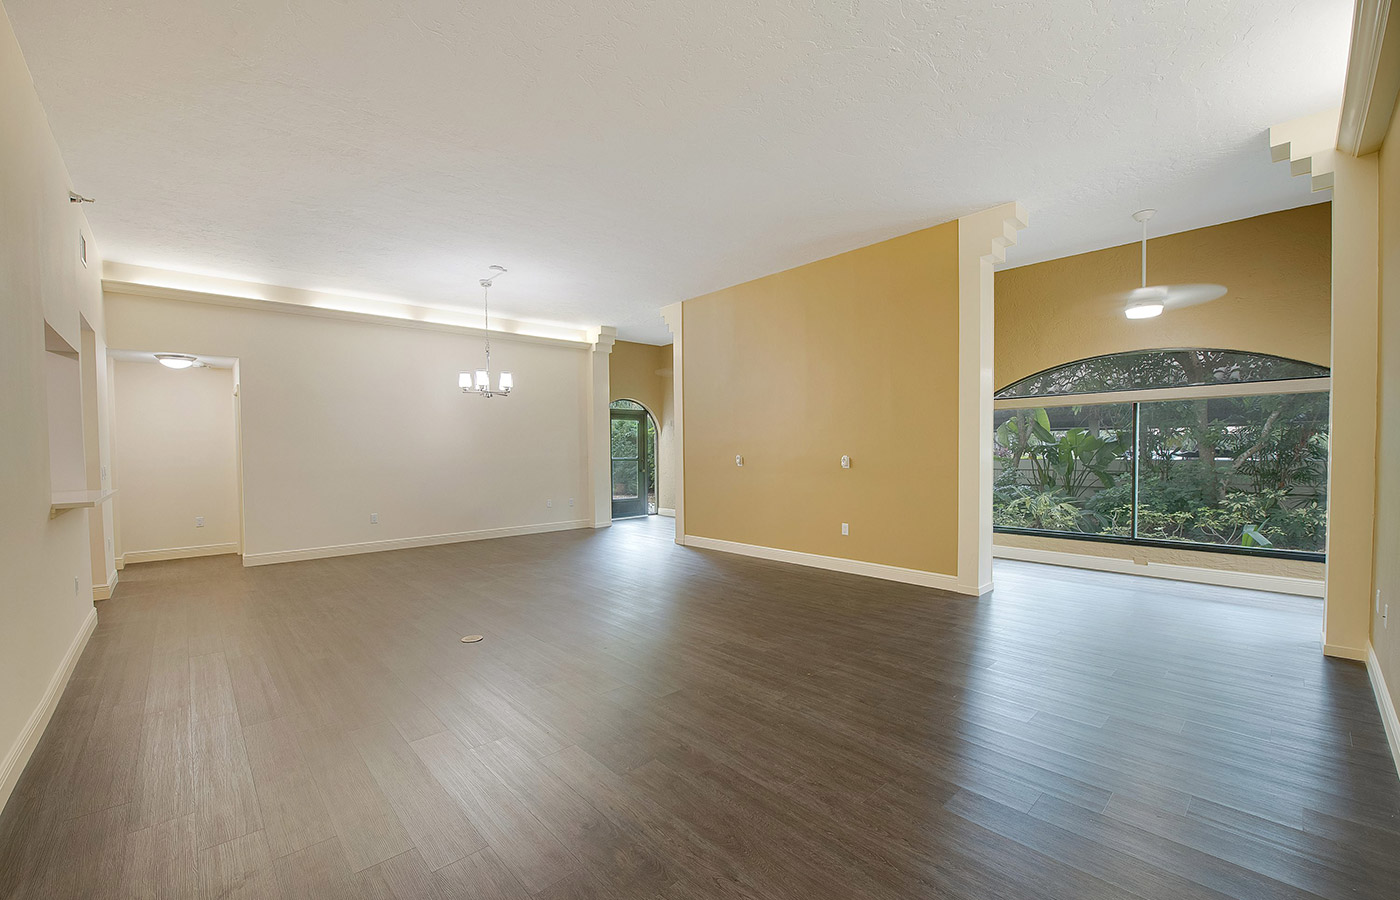 large spacious living room area with hardwood floors and large windows